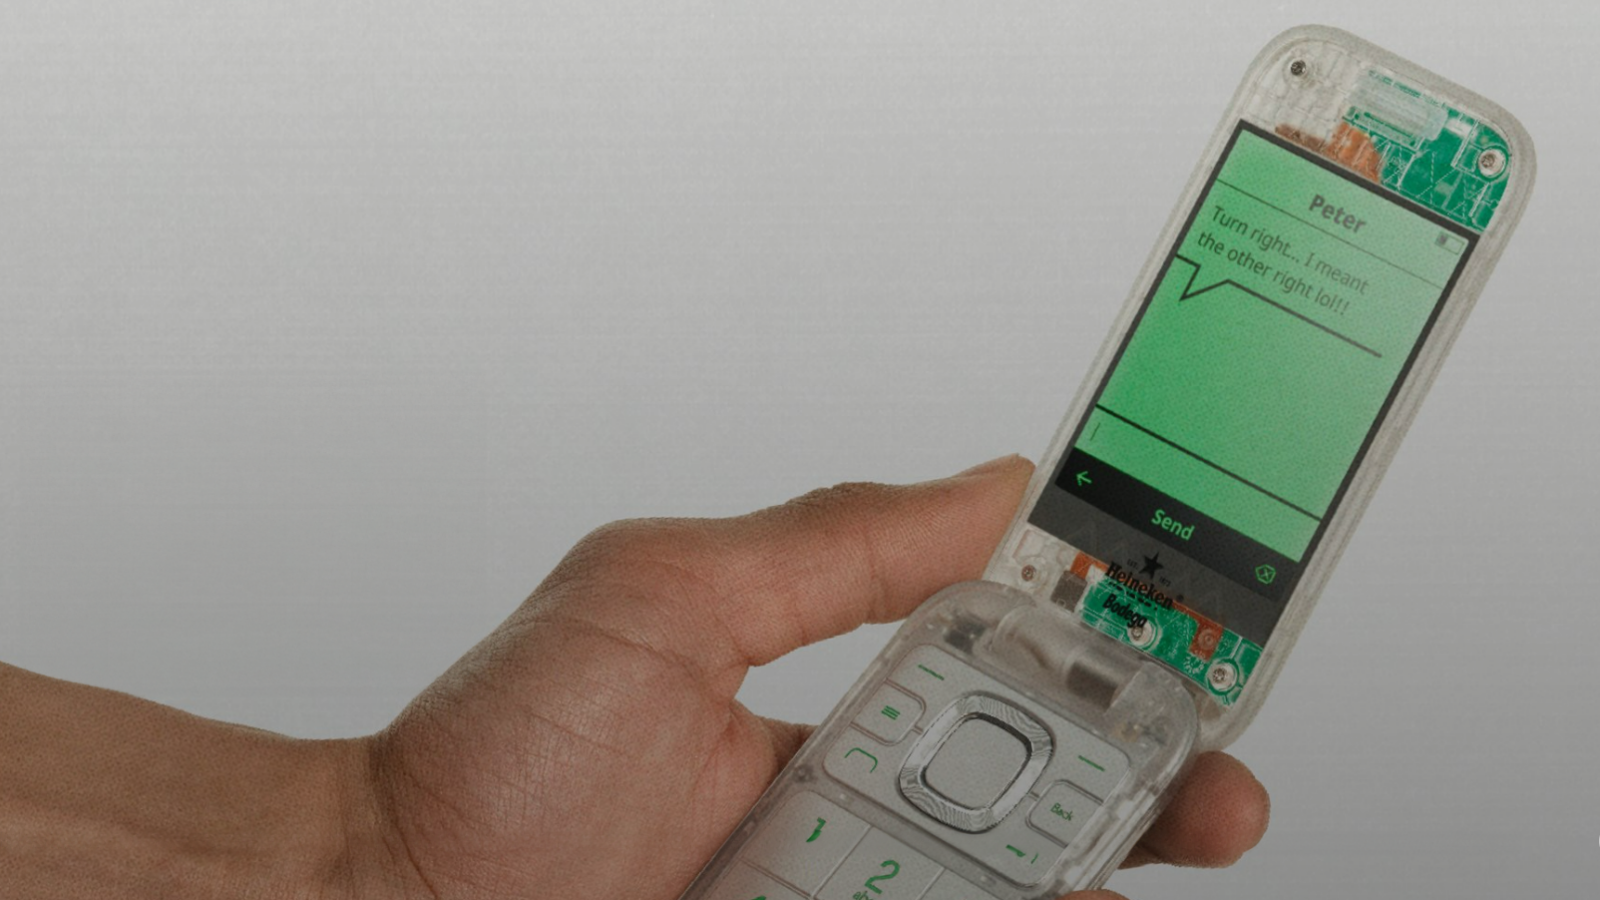 Heineken and HMD come up with the boring phone and